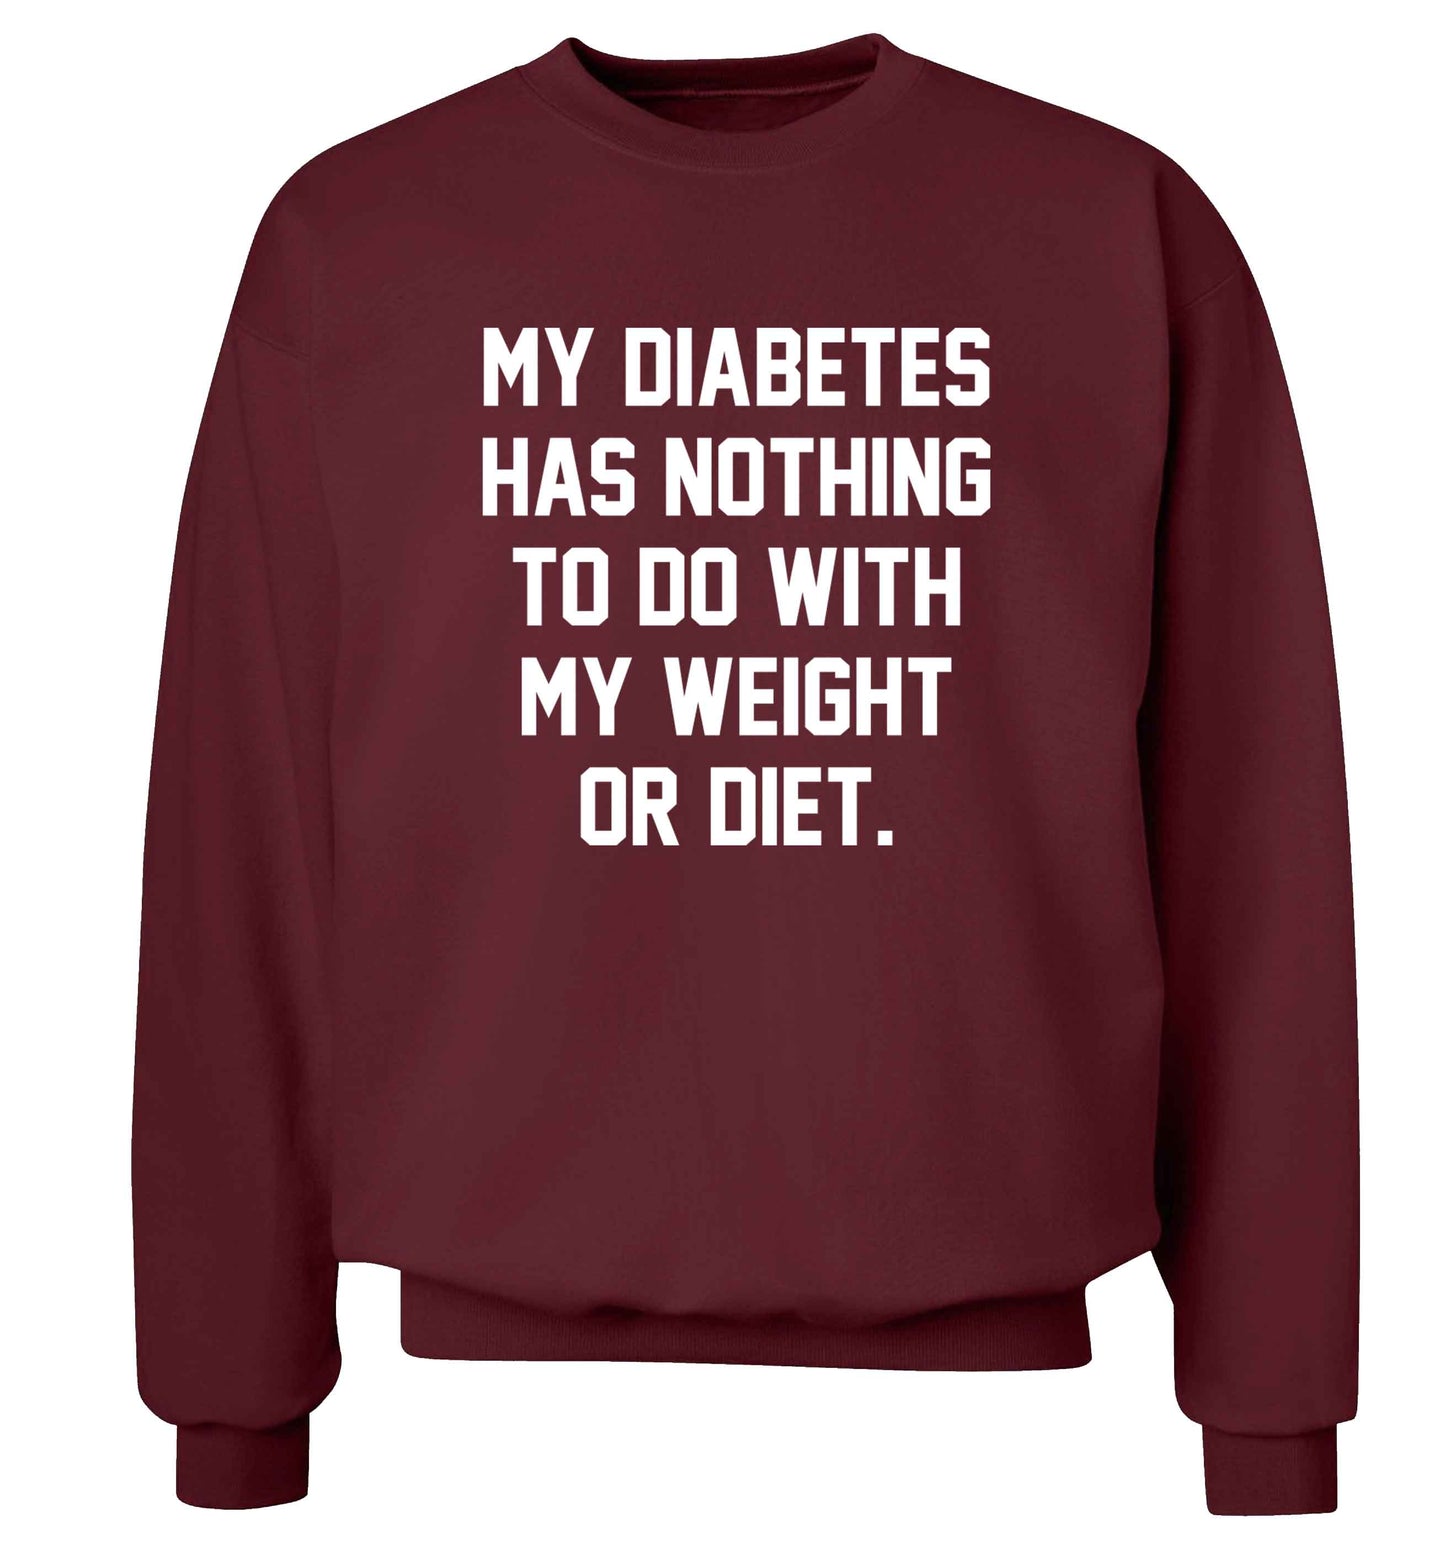 My diabetes has nothing to do with my weight or diet adult's unisex maroon sweater 2XL